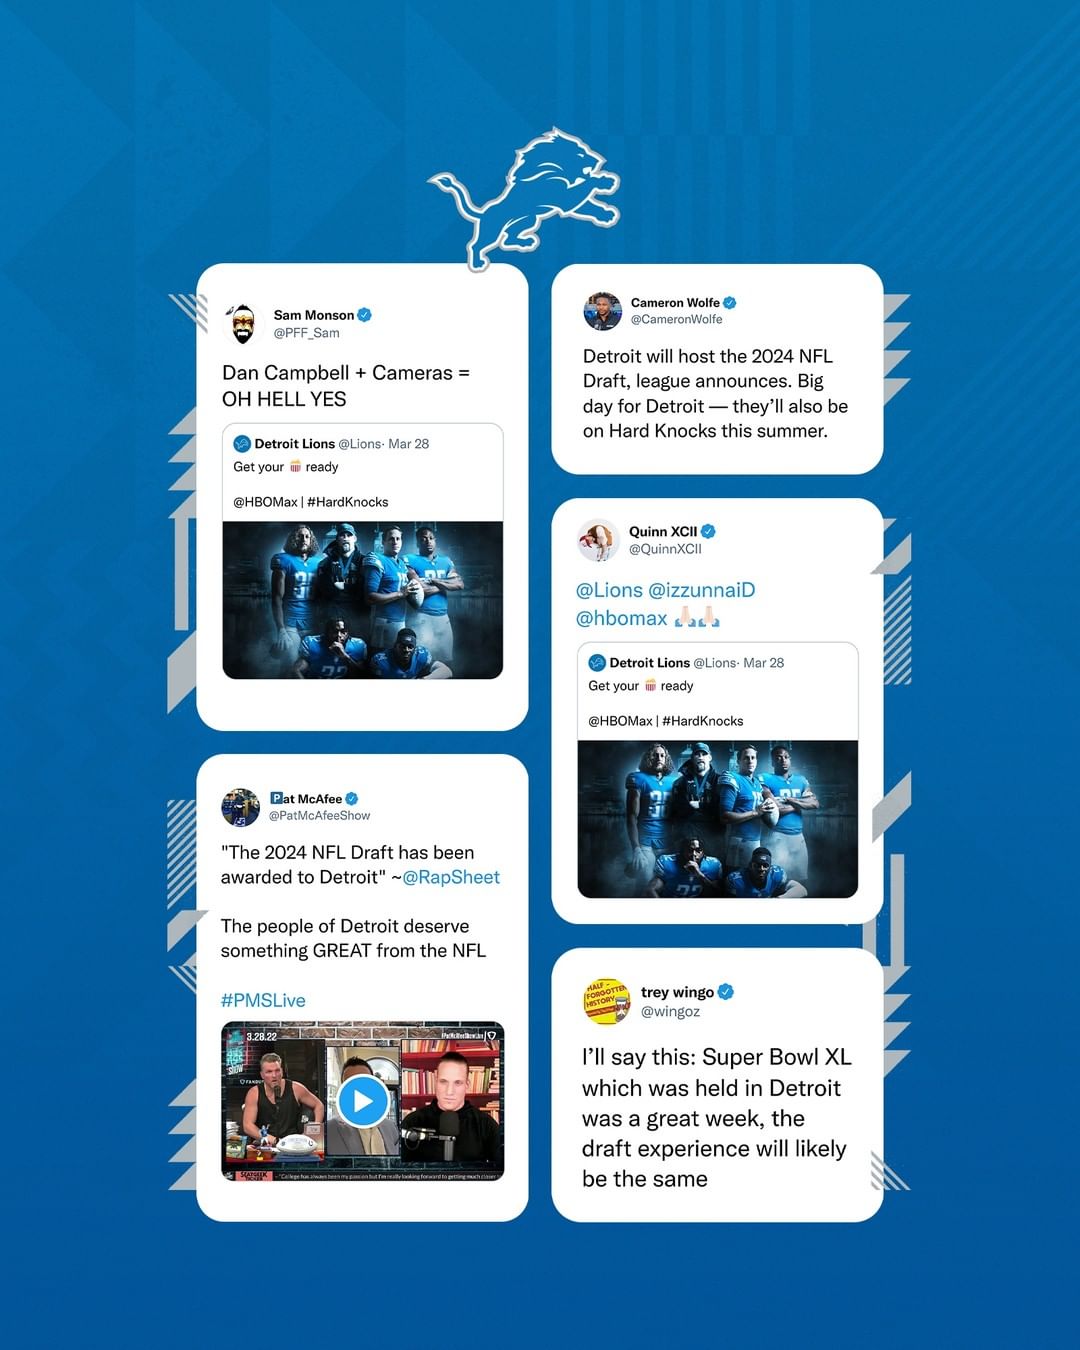 Everyone's excited! #OnePride...